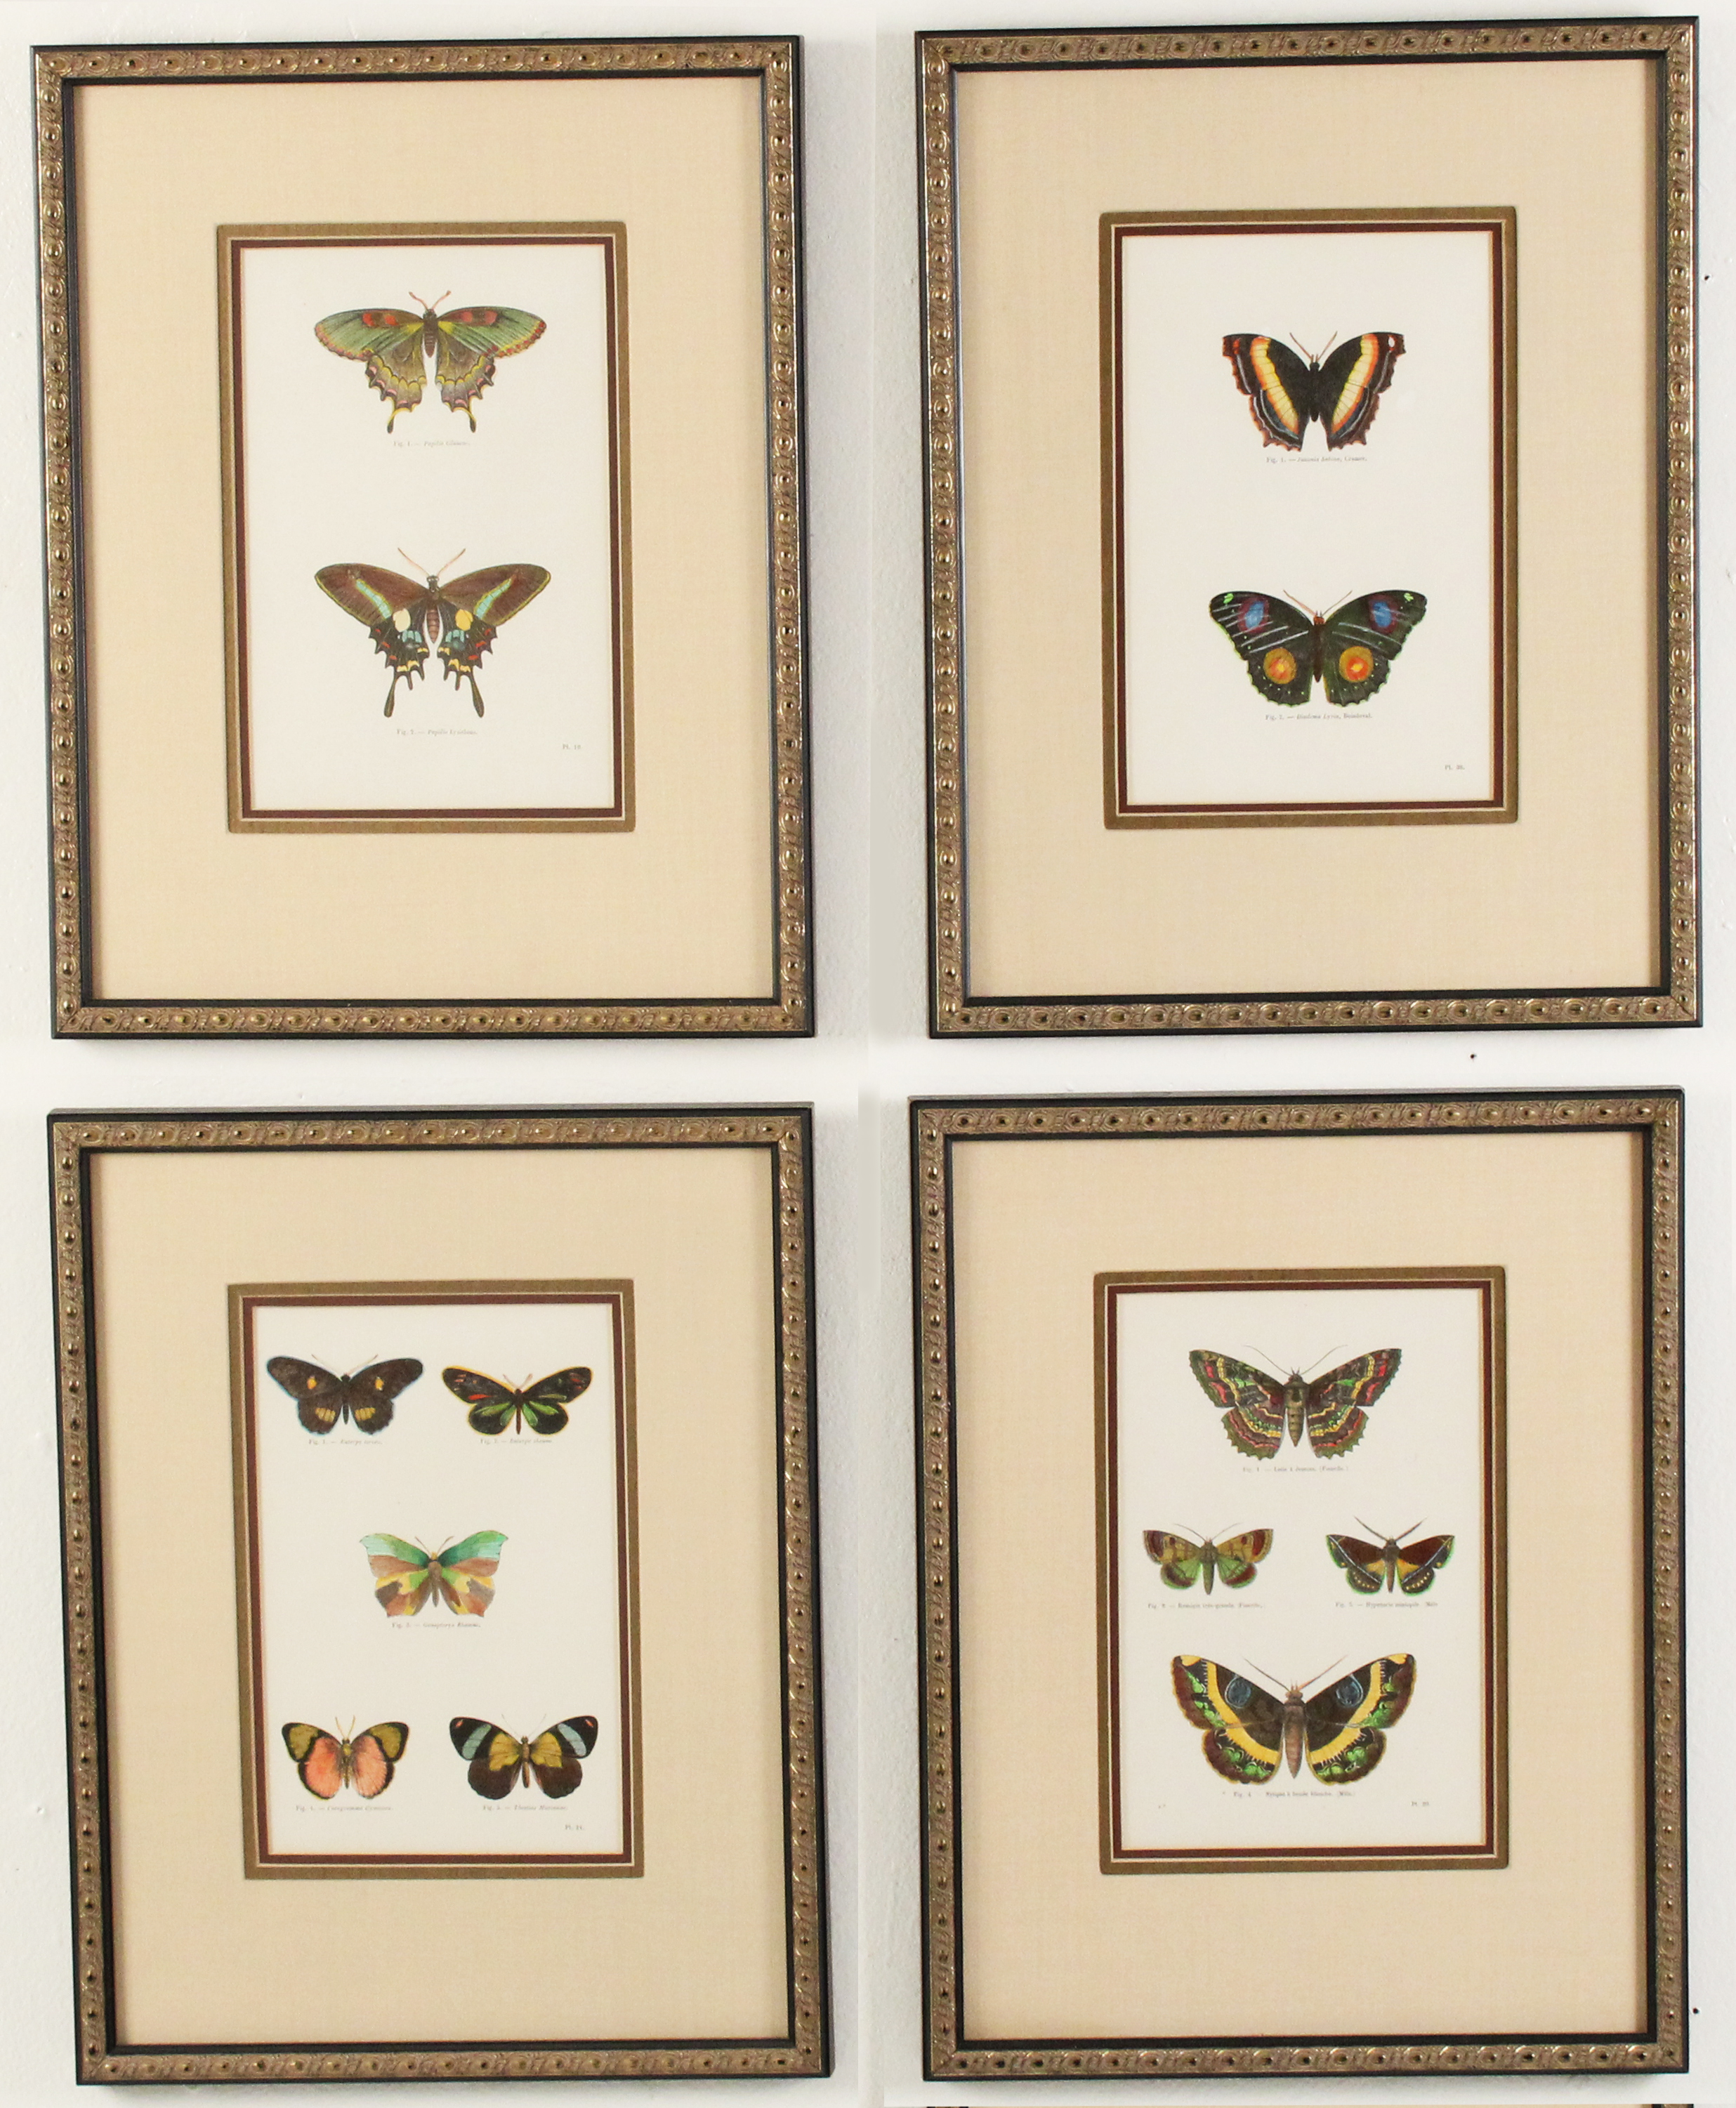 GROUP OF 4 HAND COLORED BUTTERFLY